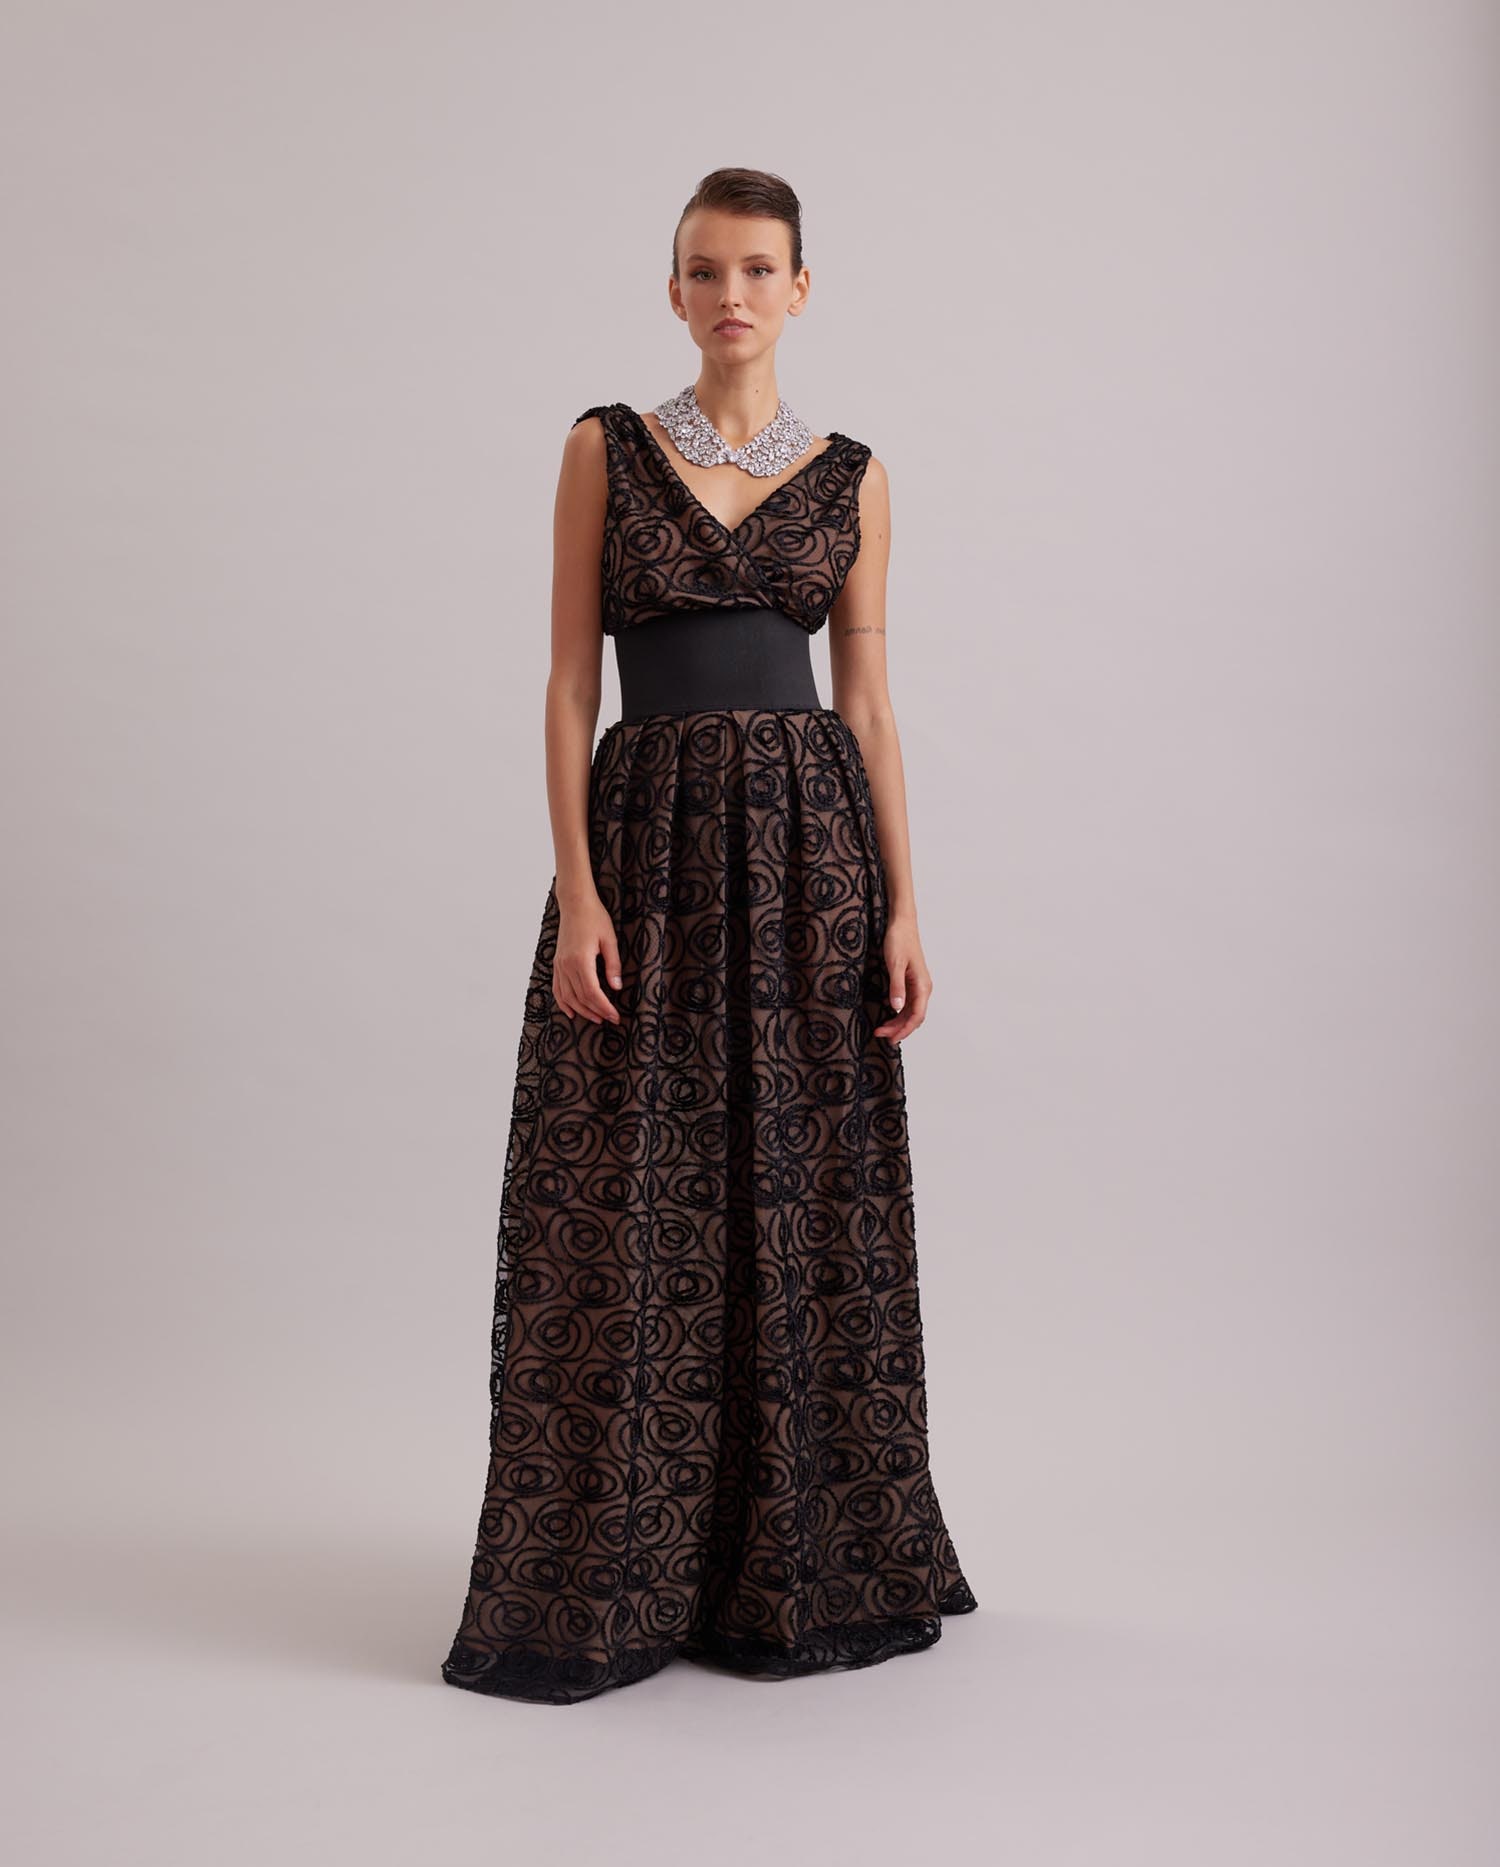 Discover the MUSE Sleeveless sheer dress with black net overlay embroidered with Velvet roses from ANNE FONTAINE